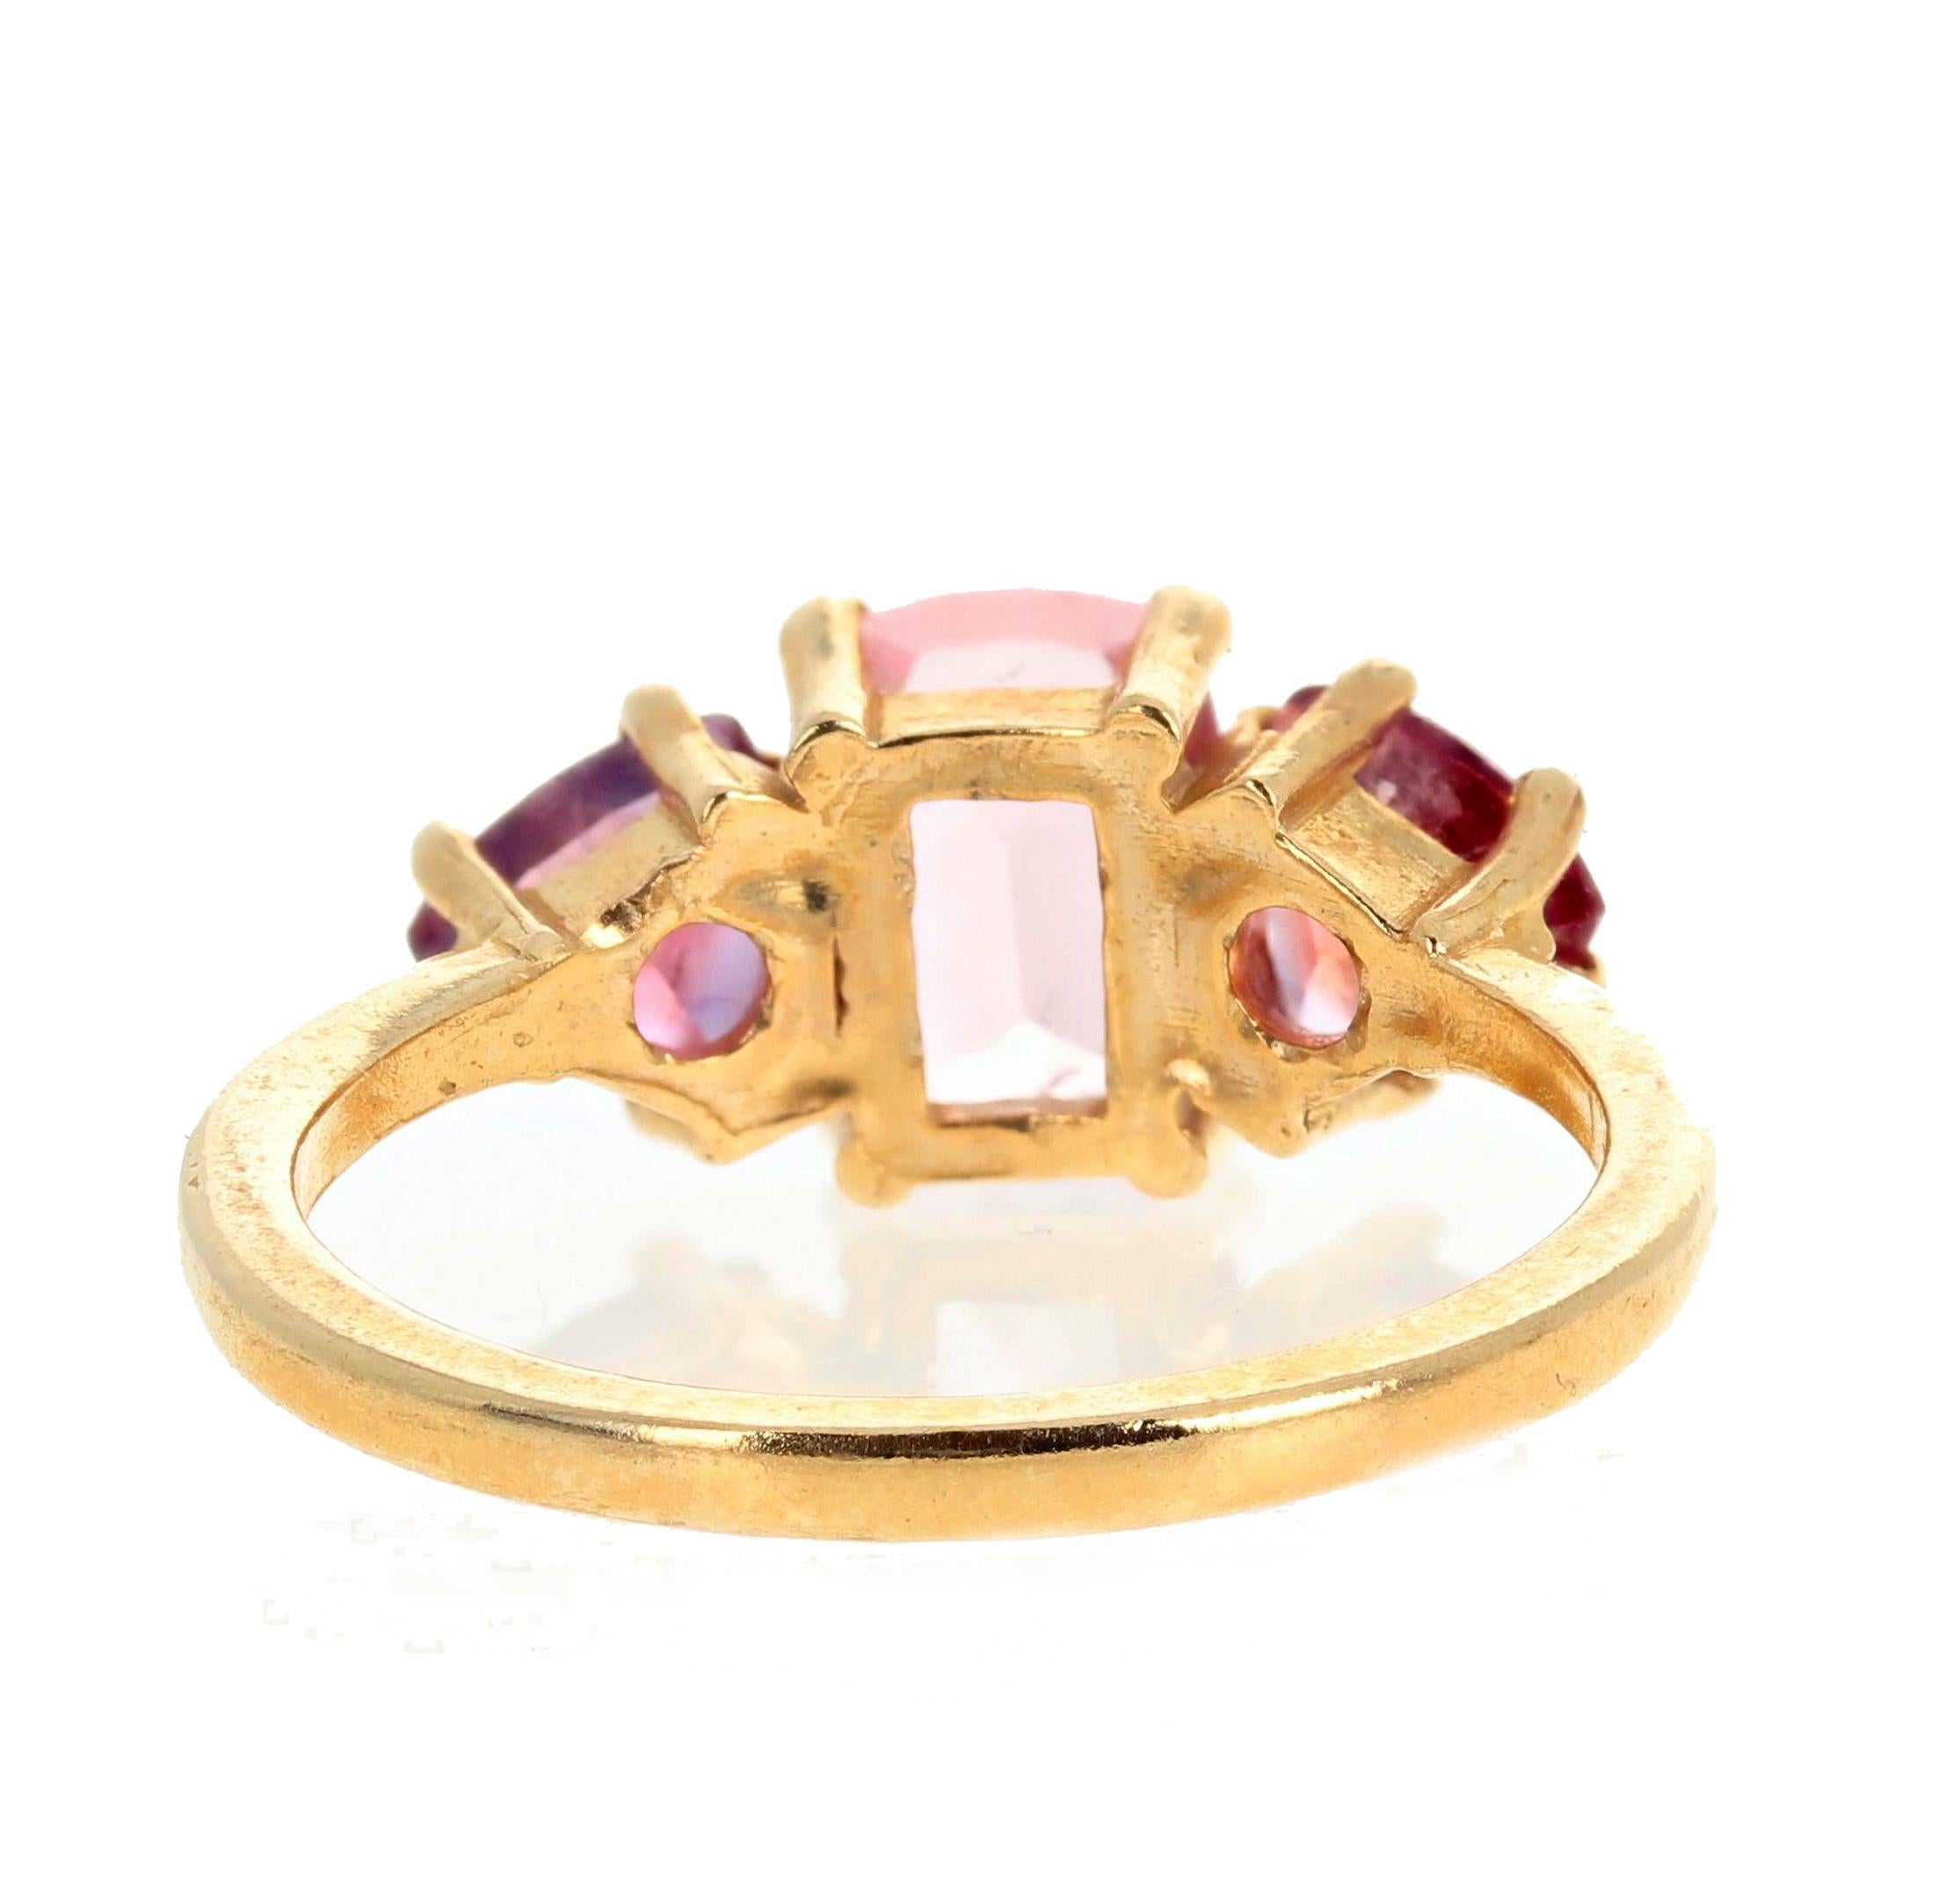 Cushion Cut Gemjunky Exotic Three Stone Pink Tourmaline & Red Spinel 14 Kt Yellow Gold Ring